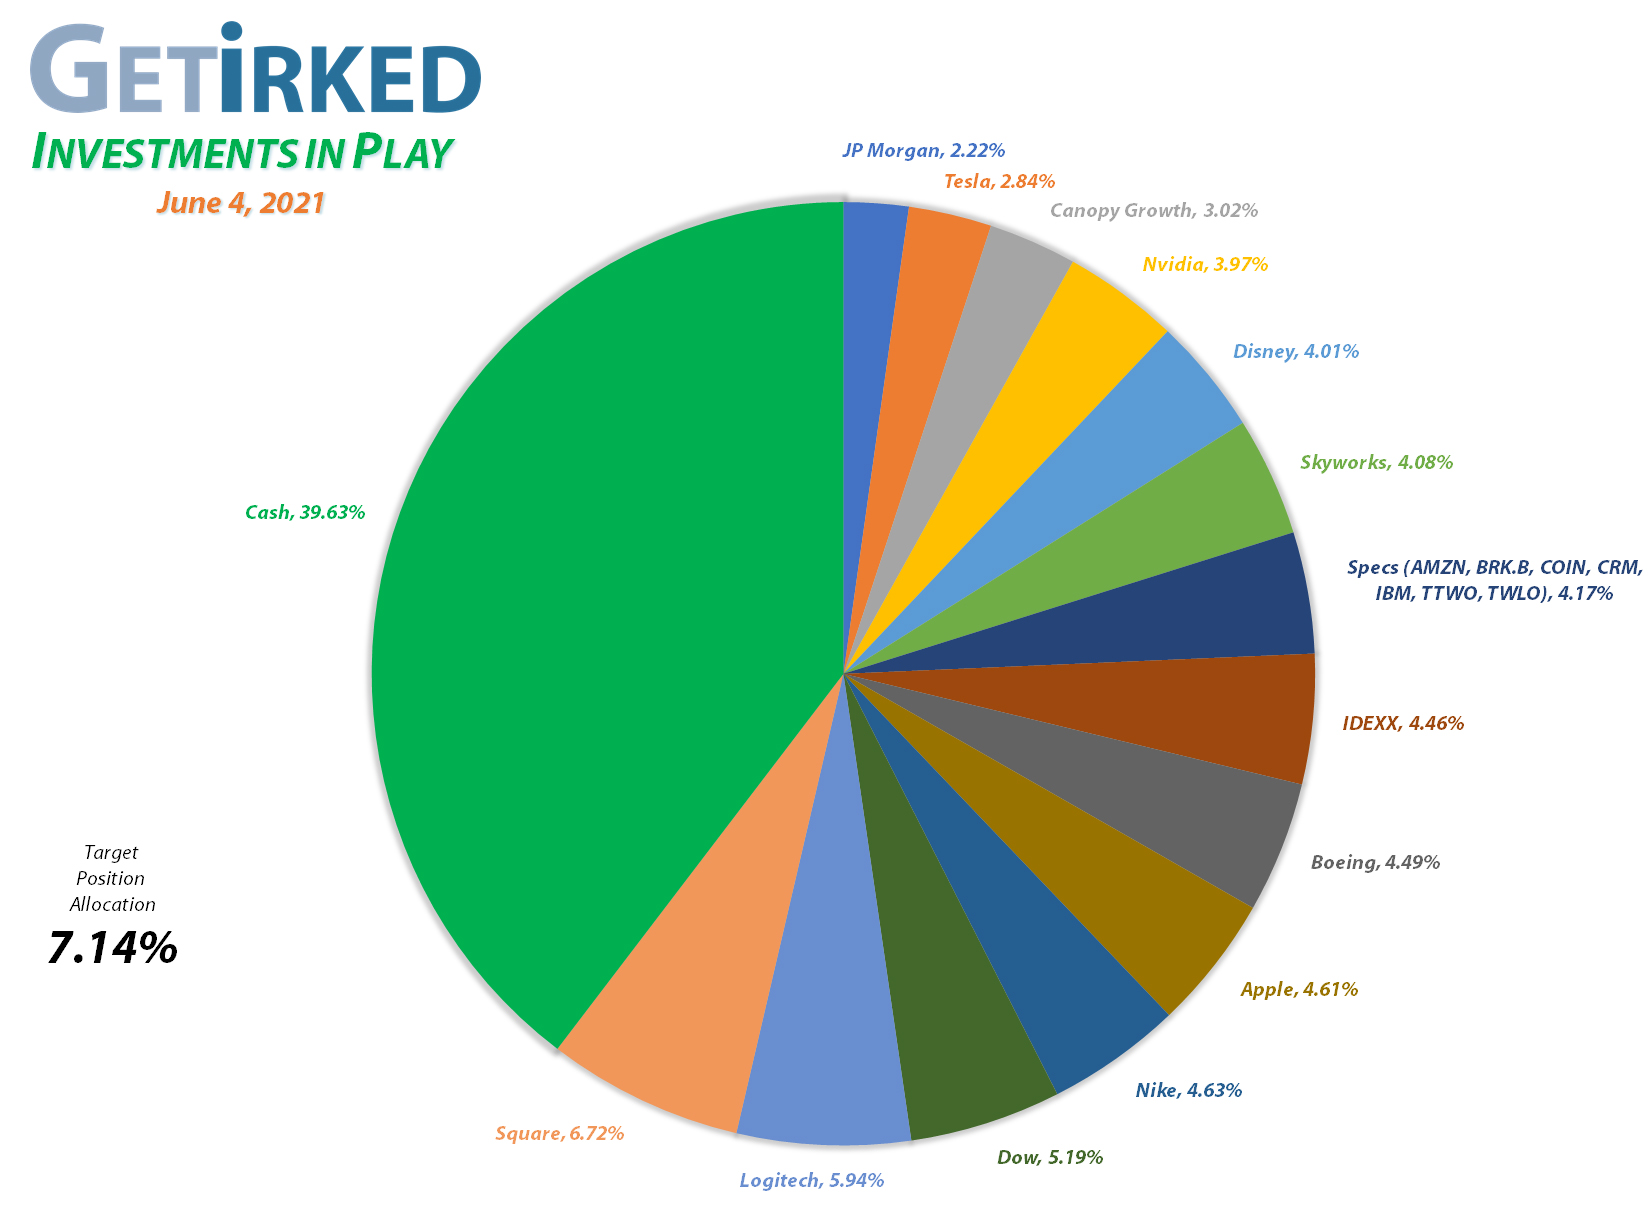 Get Irked - Investments in Play - Current Holdings - March 12, 2021et Irked's Pandemic Portfolio Holdings as of June 4, 2021